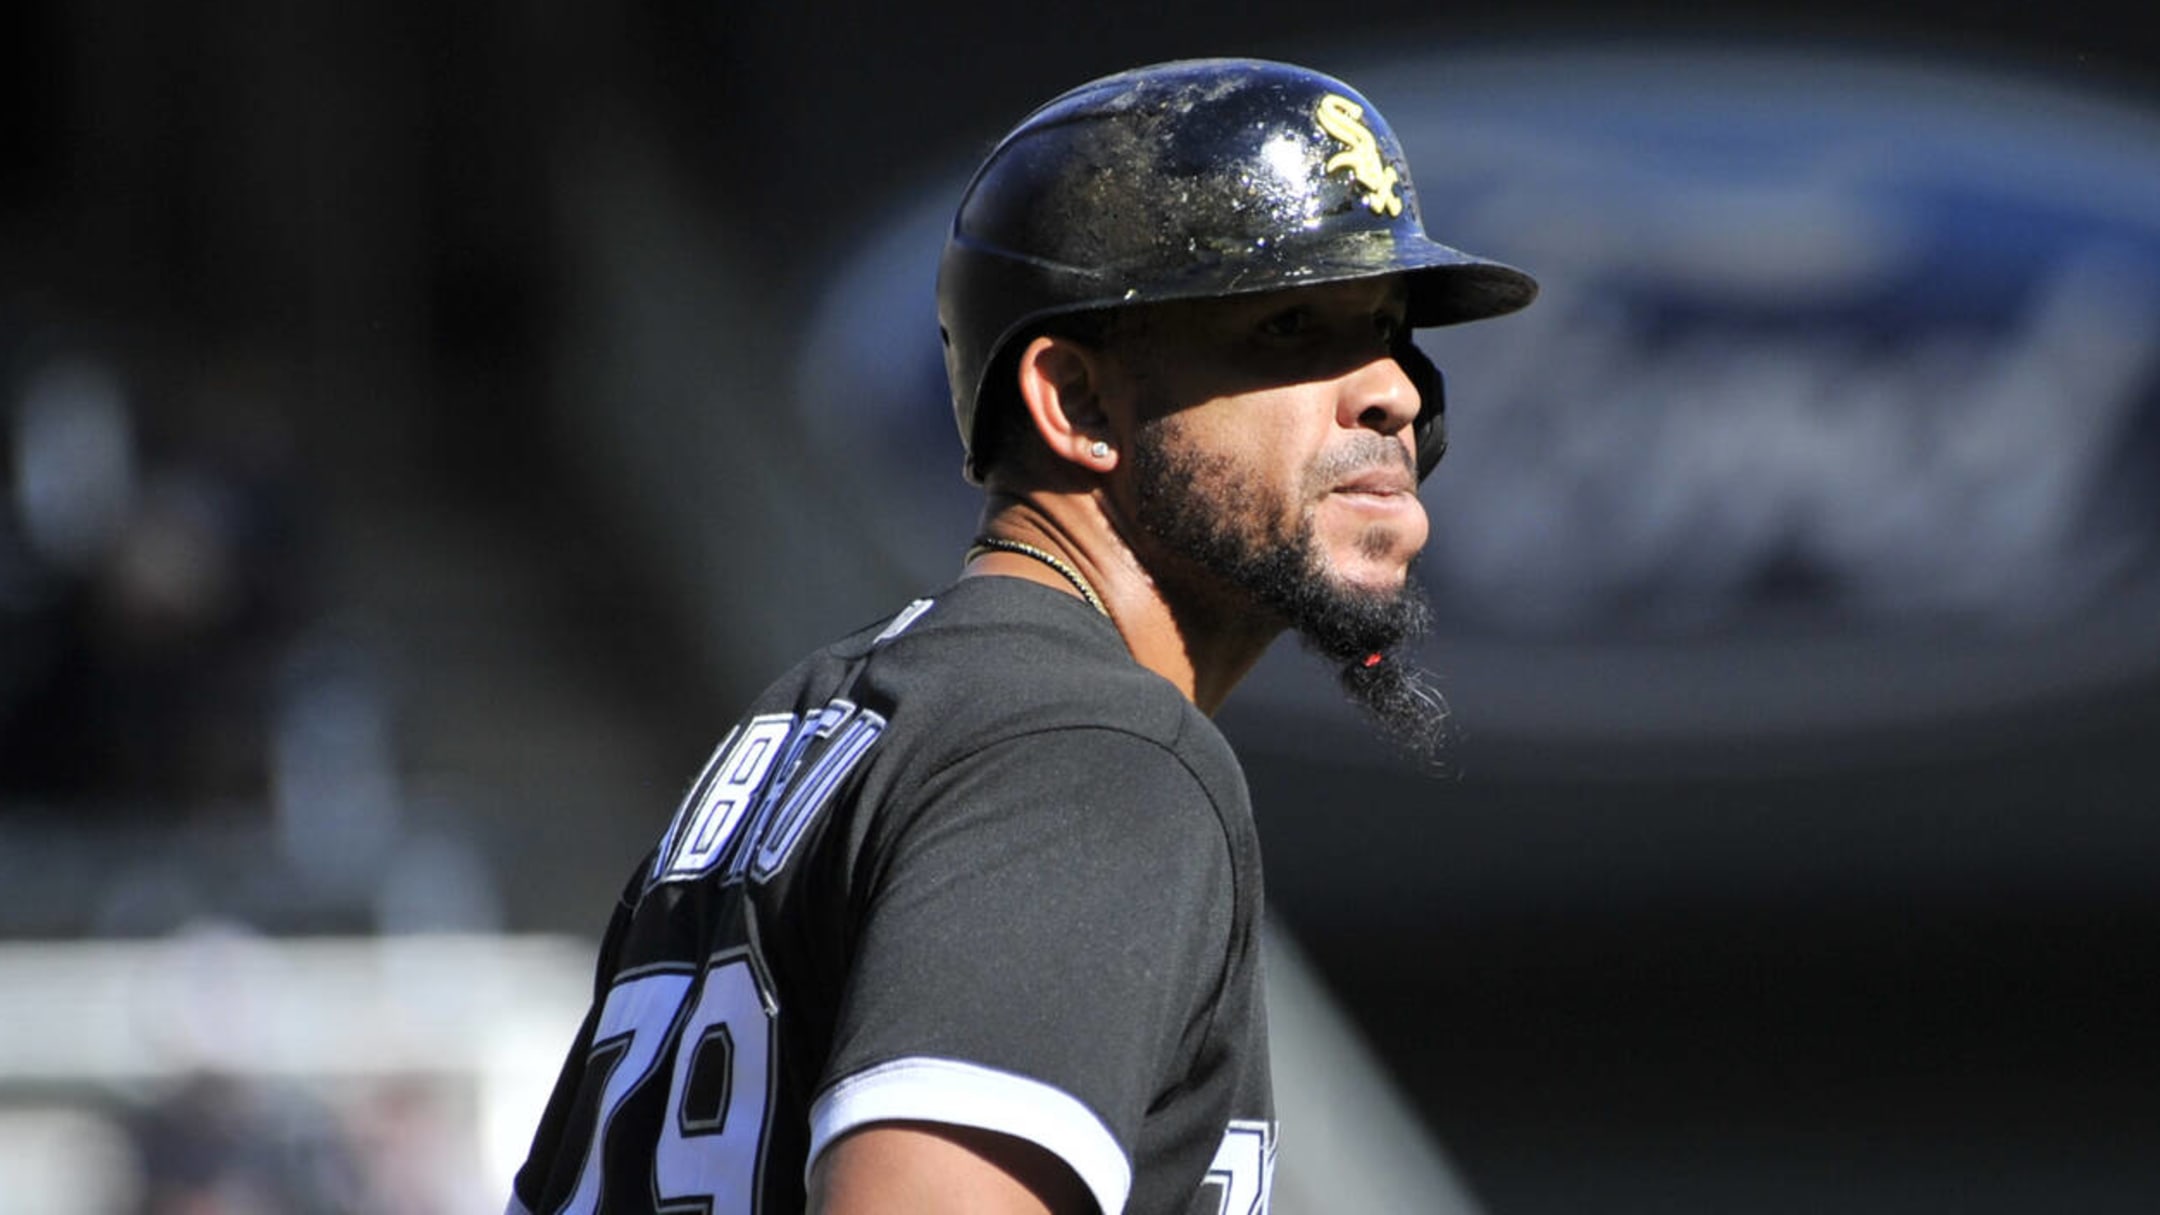 Report: Jose Abreu was Red Sox' No. 1 target before Astros signing